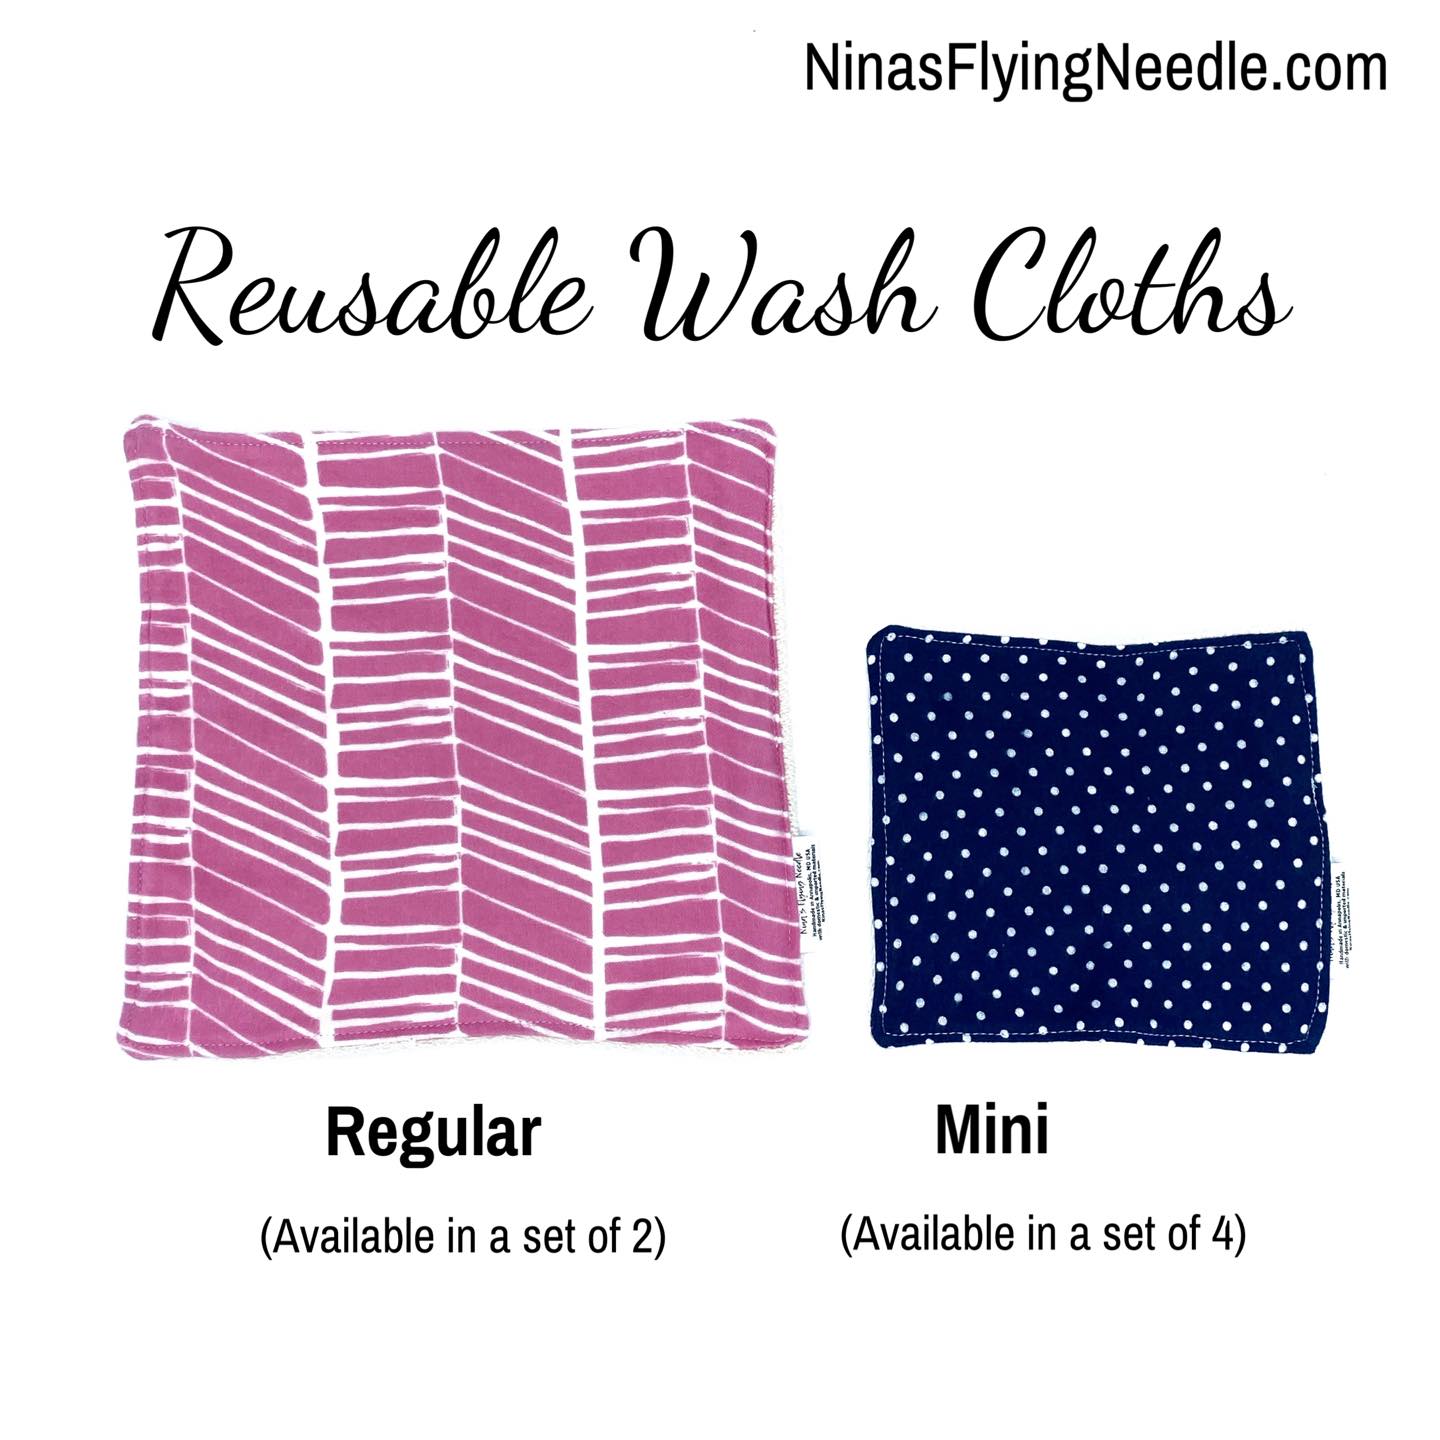 Wash Cloth - Regular - Trucks and Blue and White Gingham